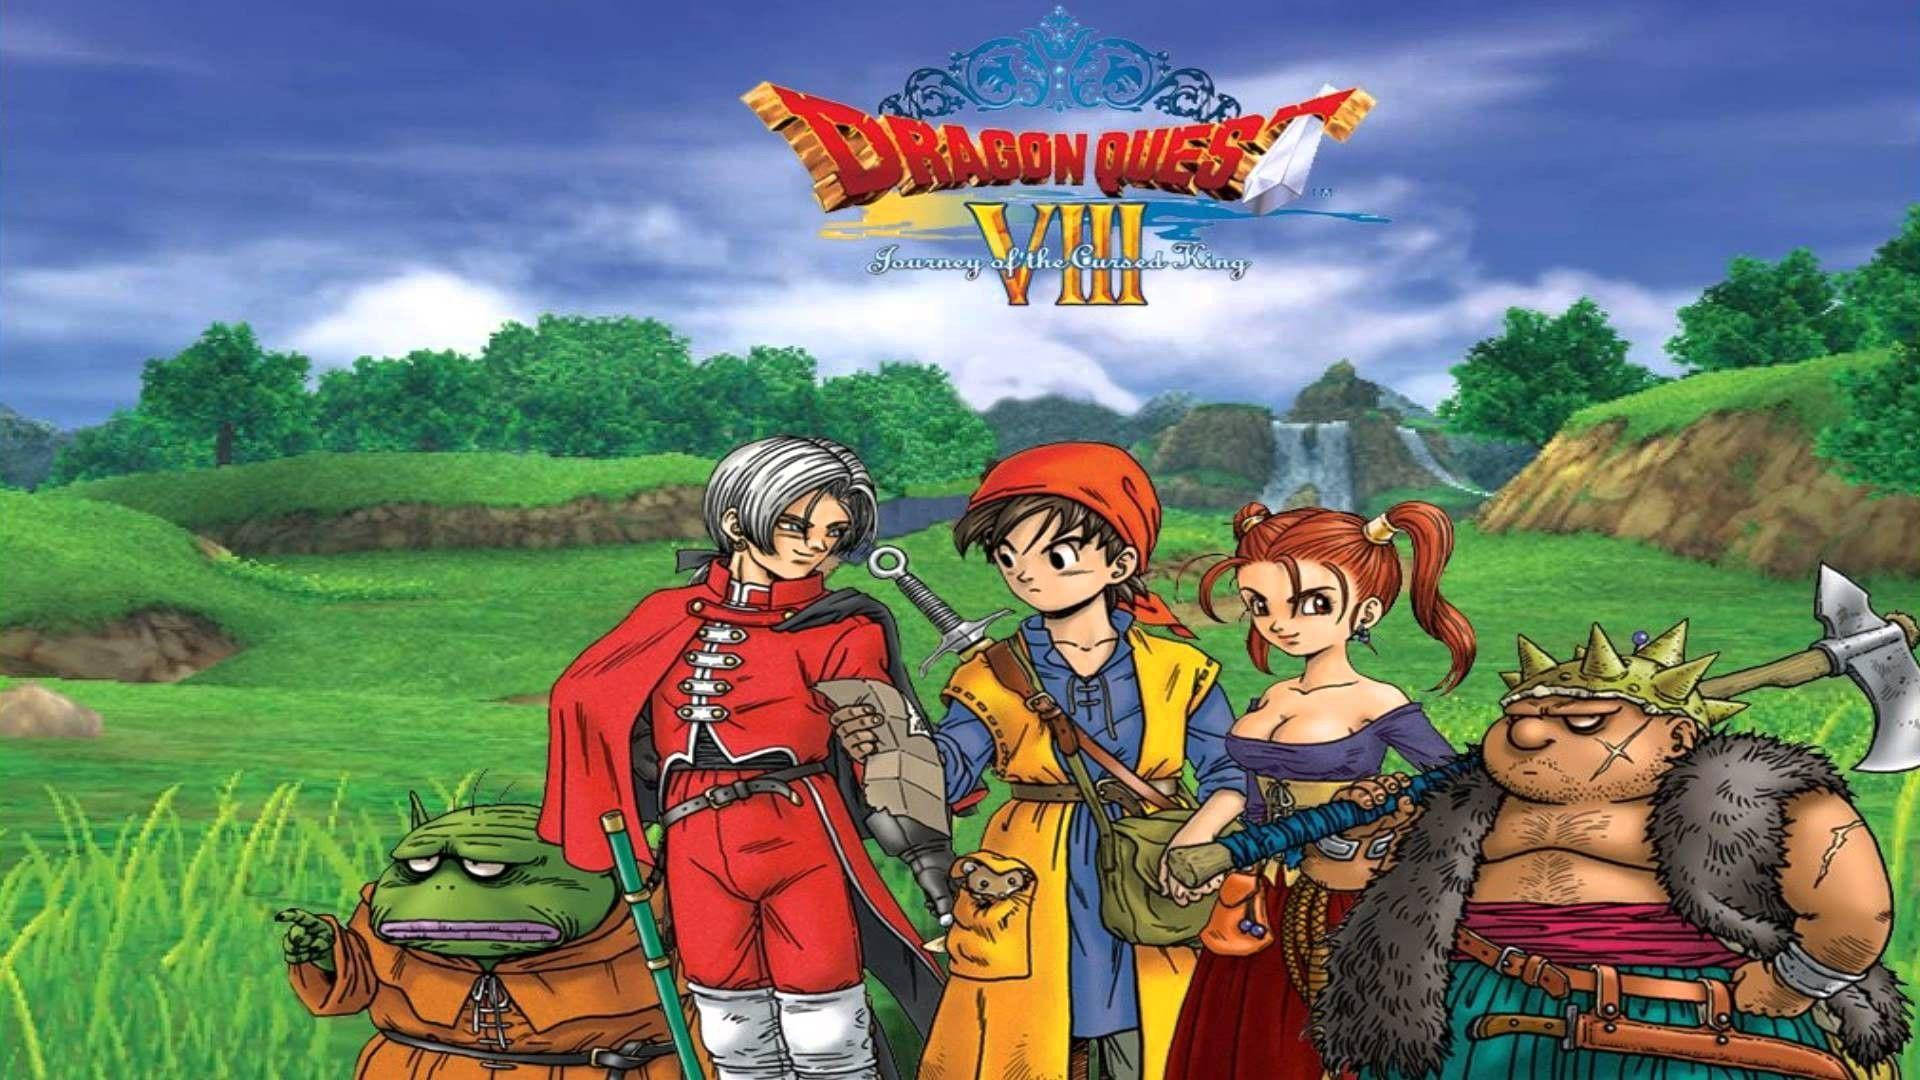 Dragon Quest Viii Protagonists In A Grassy Field